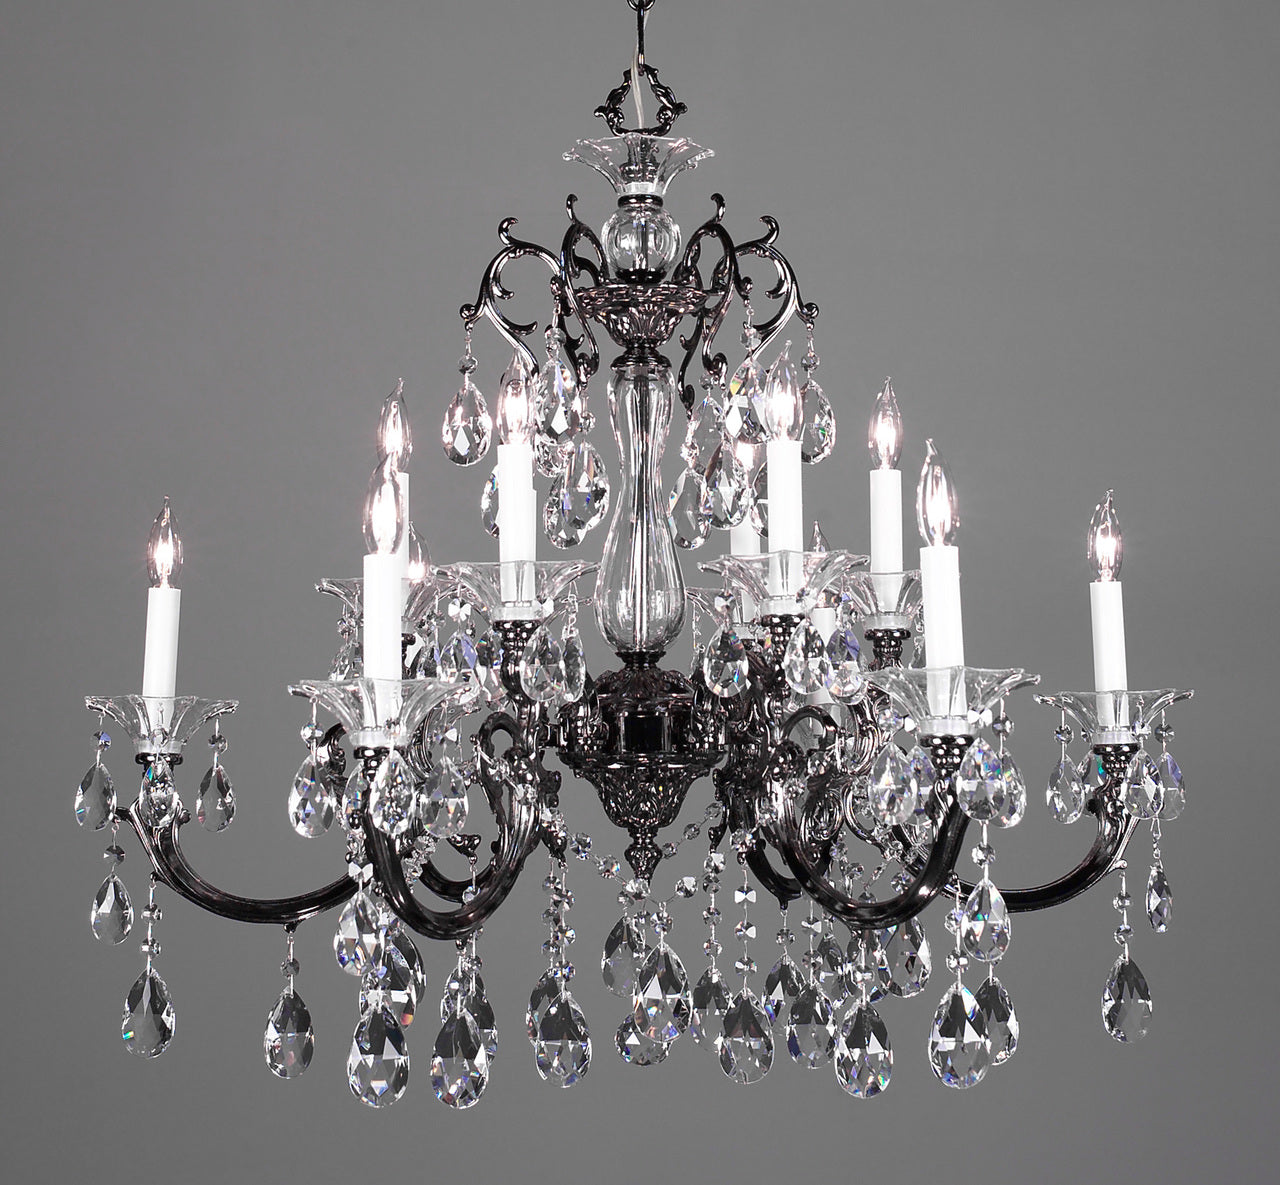 Classic Lighting 57063 EP SJT Via Lombardi Crystal Chandelier in Ebony Pearl (Imported from Spain)